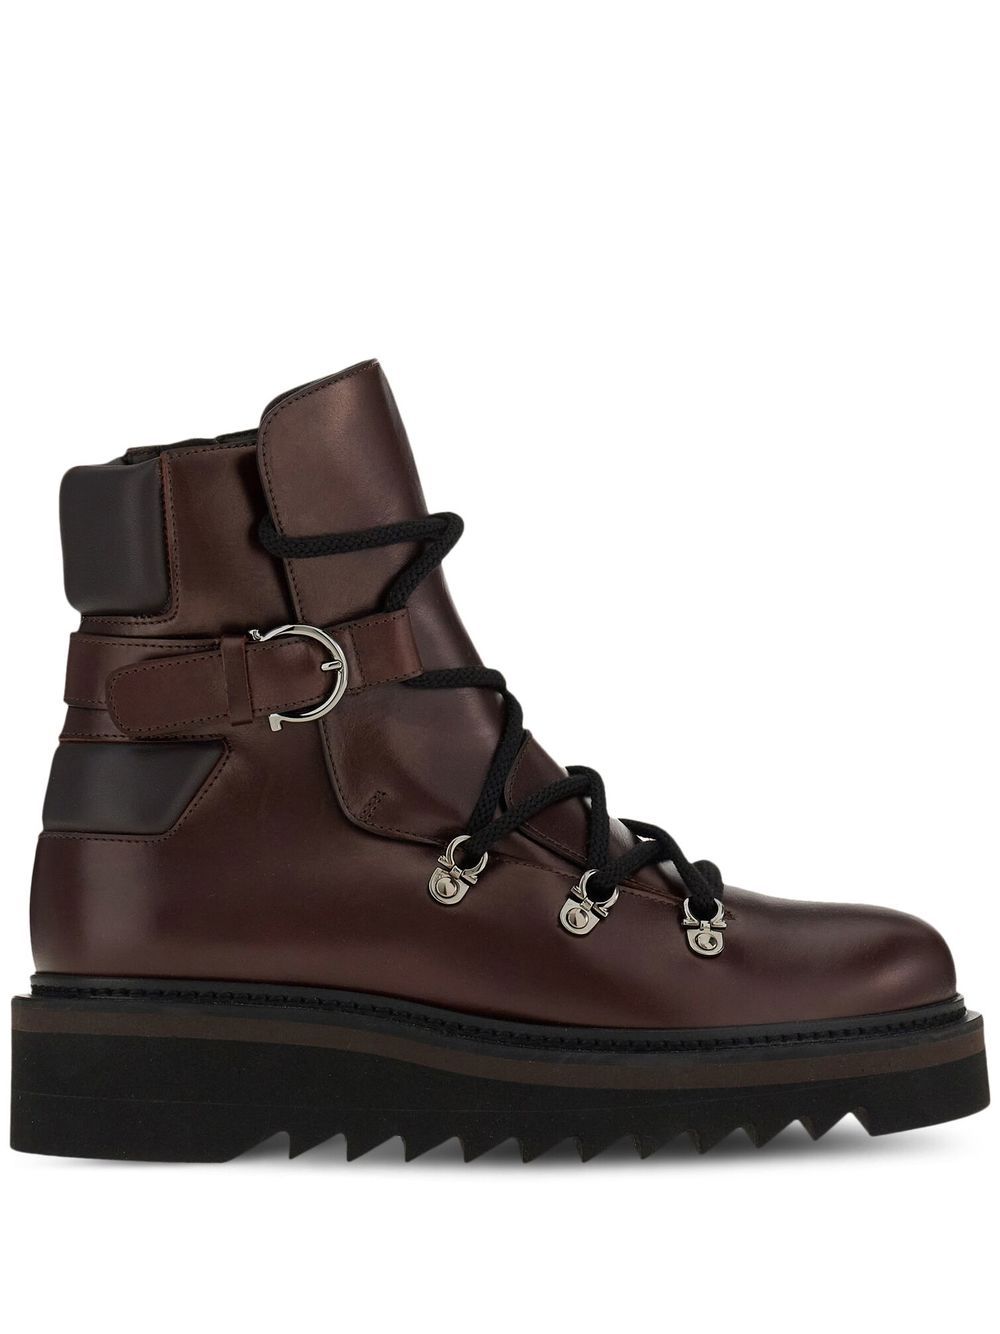 Elimo lace-up boots